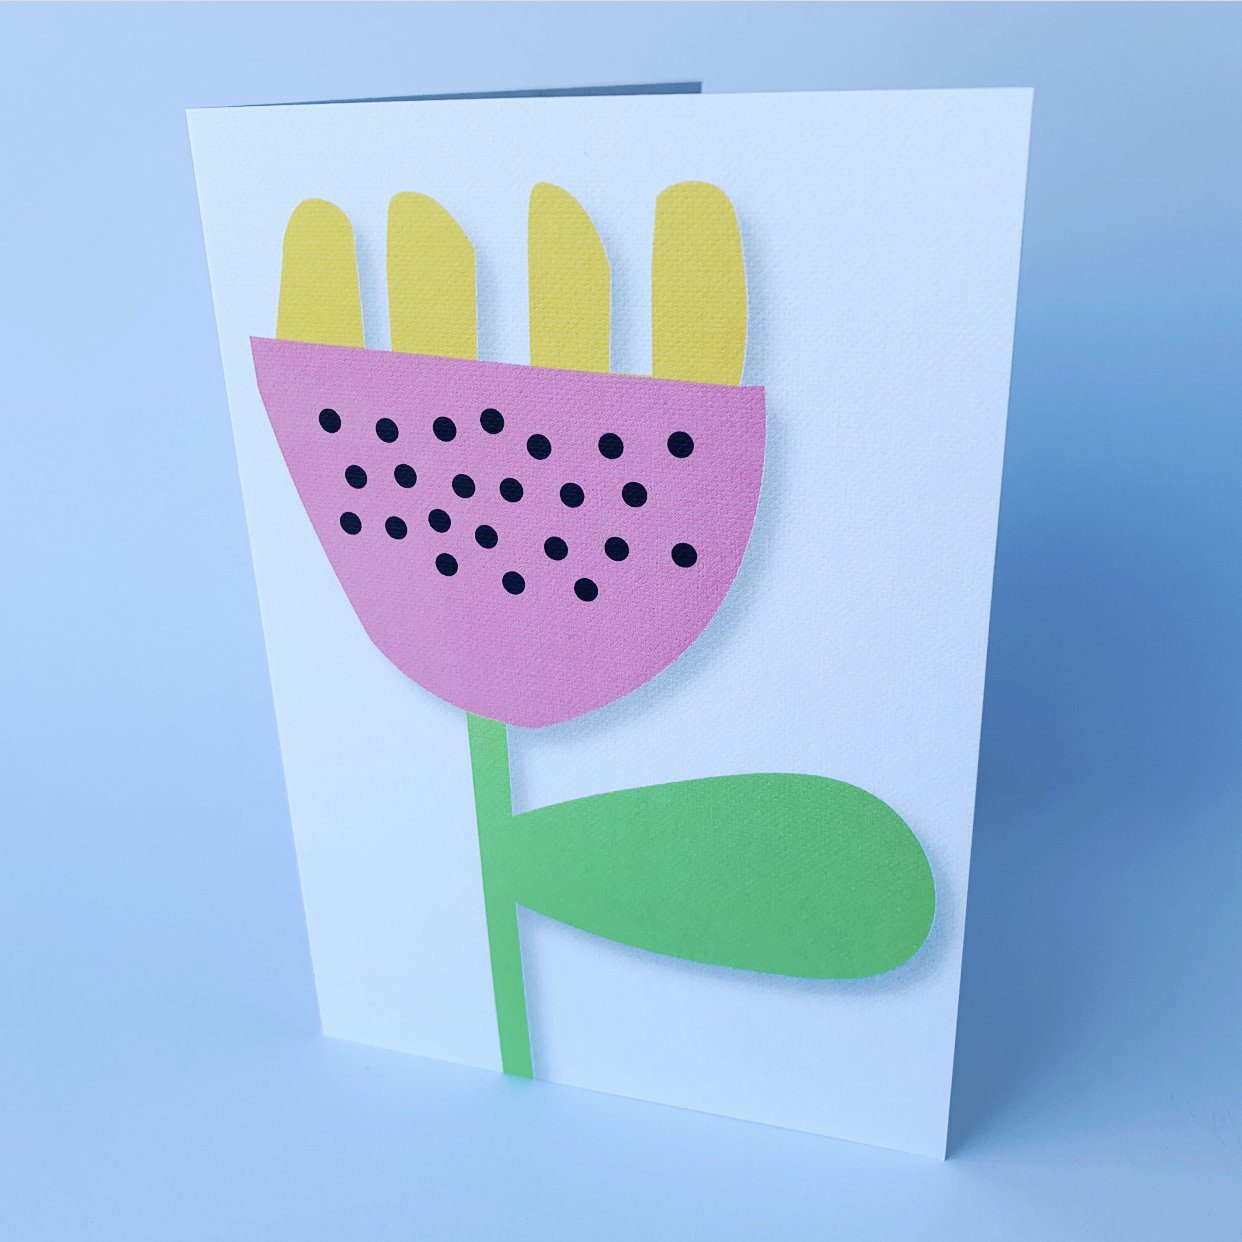 Happy Pink and Yellow Everyday Card  by Fiona Wilson